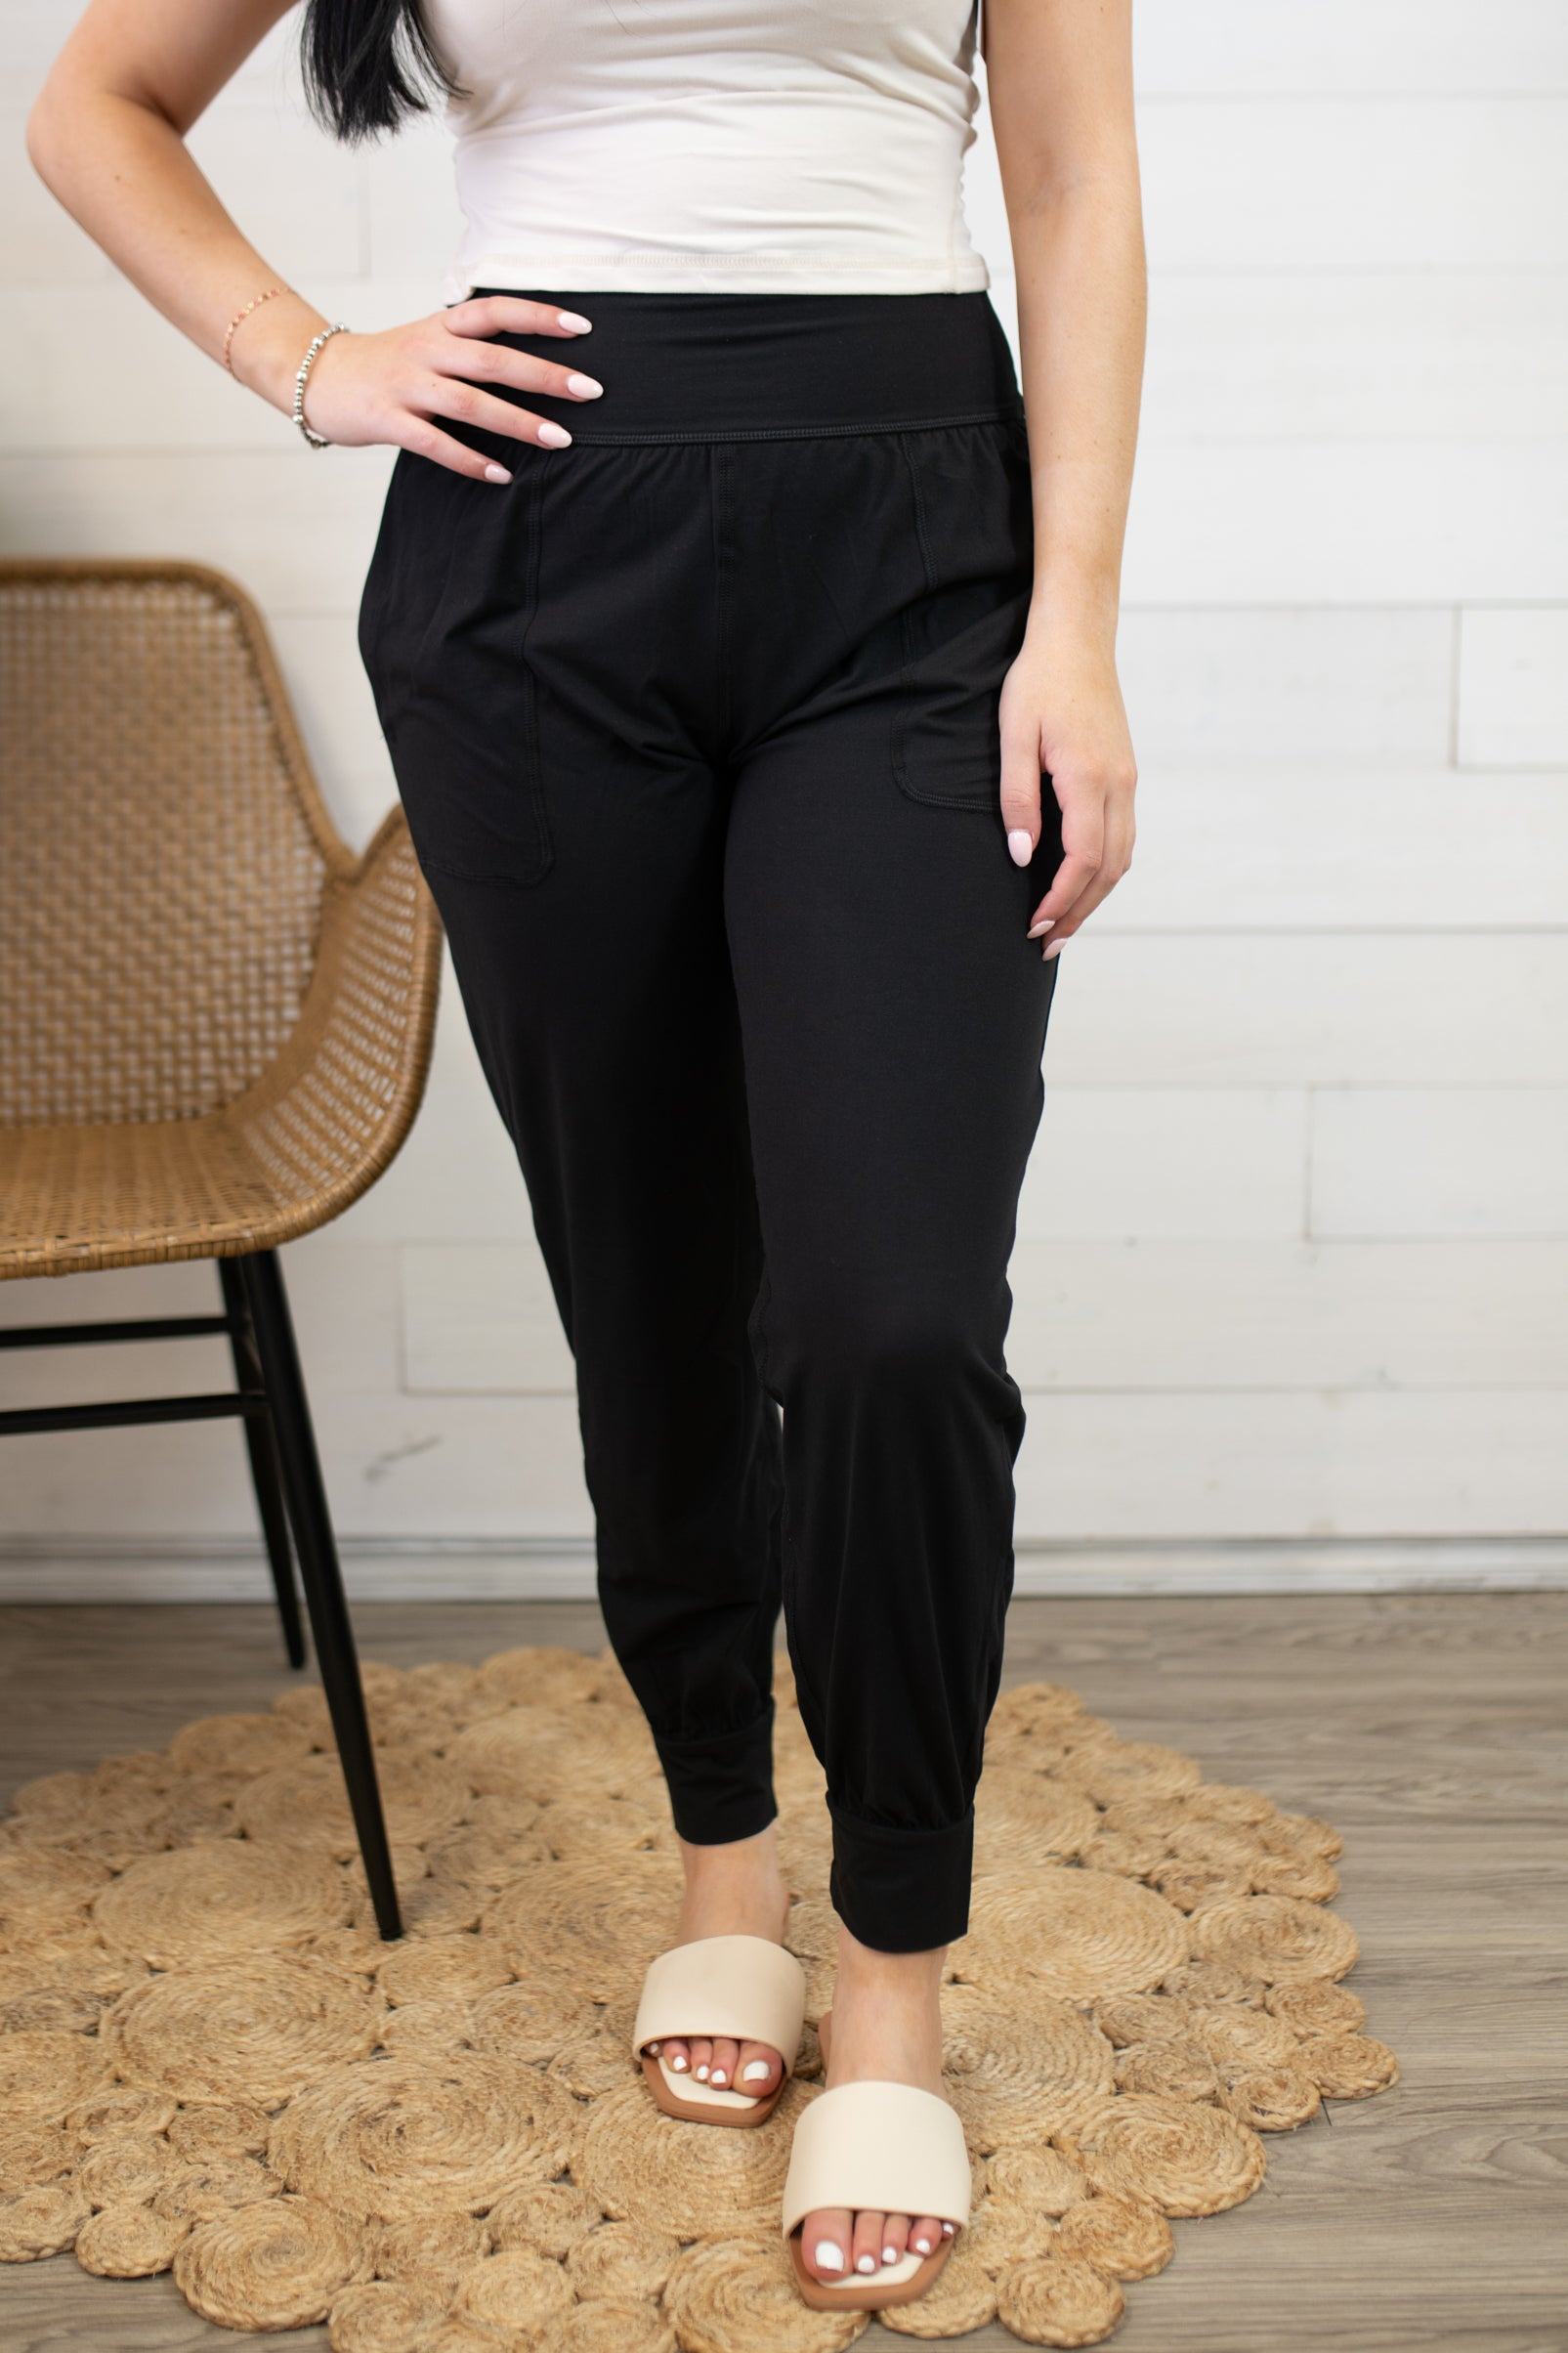 Black Butter Fabric Yoga High Waisted Band Joggers